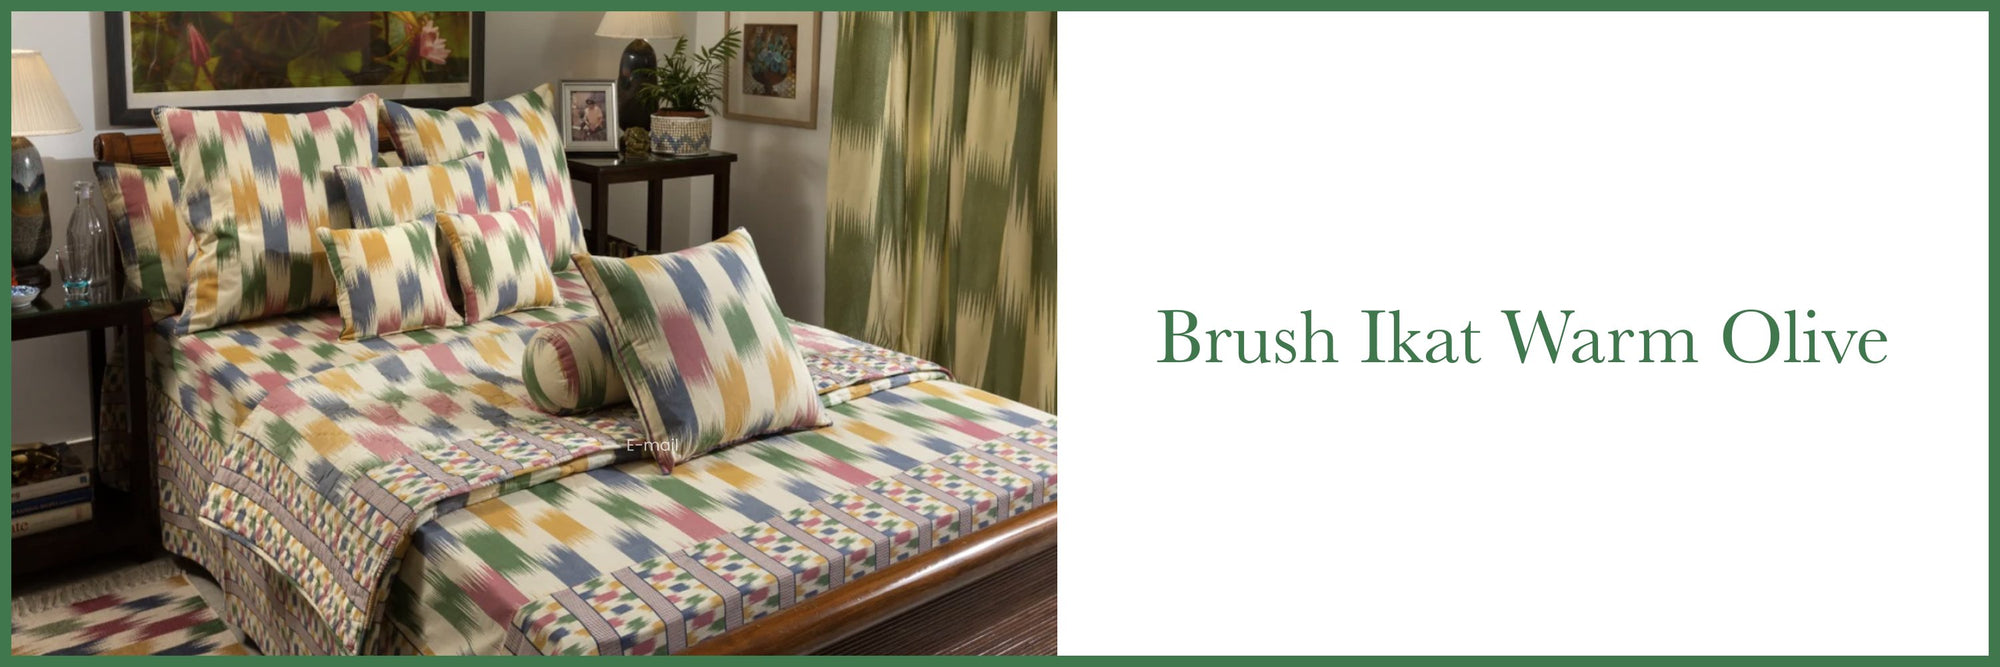 Brush Ikat Warm Olive - Bedroom Collection